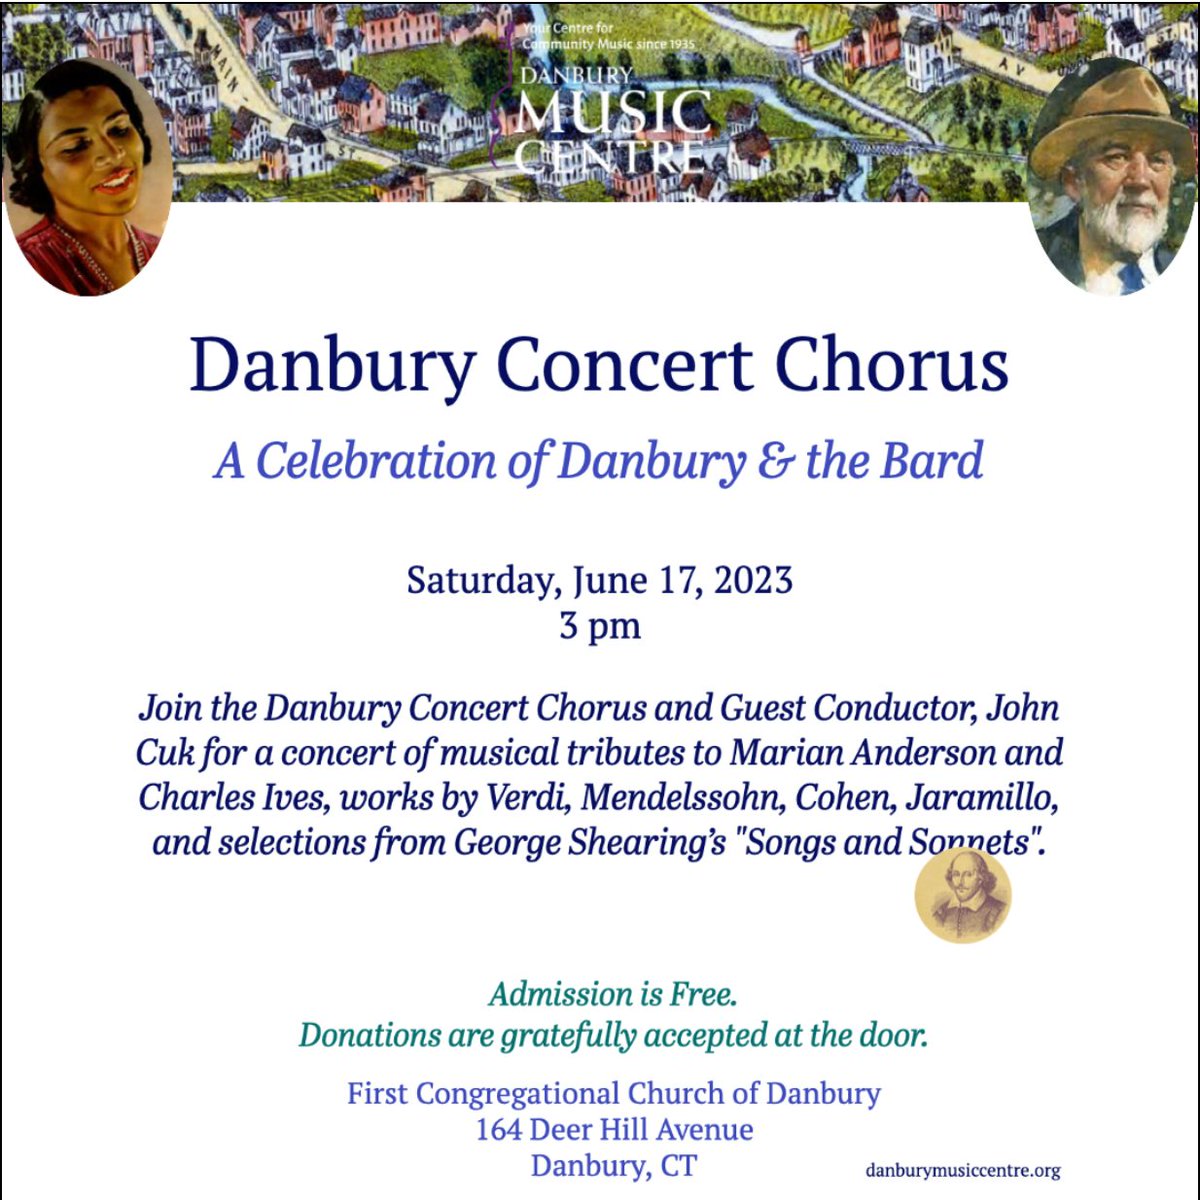 Immaculate is proud to call the city of Danbury its home. The #DanburyMusicCentre and #CityCenterDanbury are offering family-friendly events for everyone! Come out this weekend and enjoy our beautiful city!

#DanburyCT is our #Campus #MustangPride